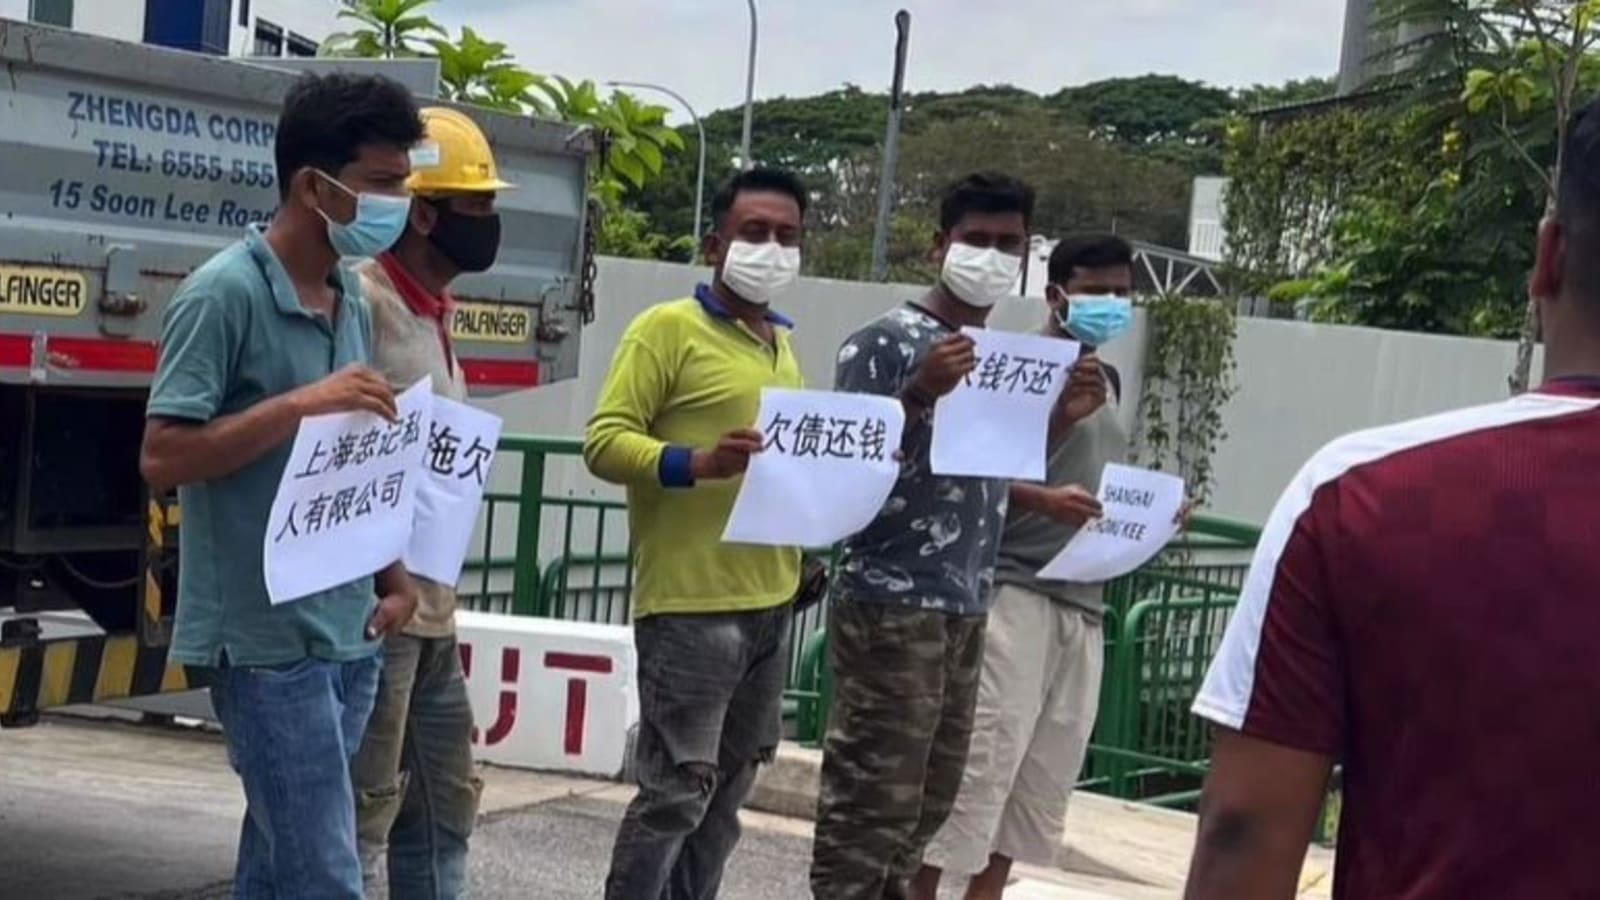 5-workers-in-ang-mo-kio-protest-were-owed-salaries;-payments-settled-in-full-by-employer:-mom